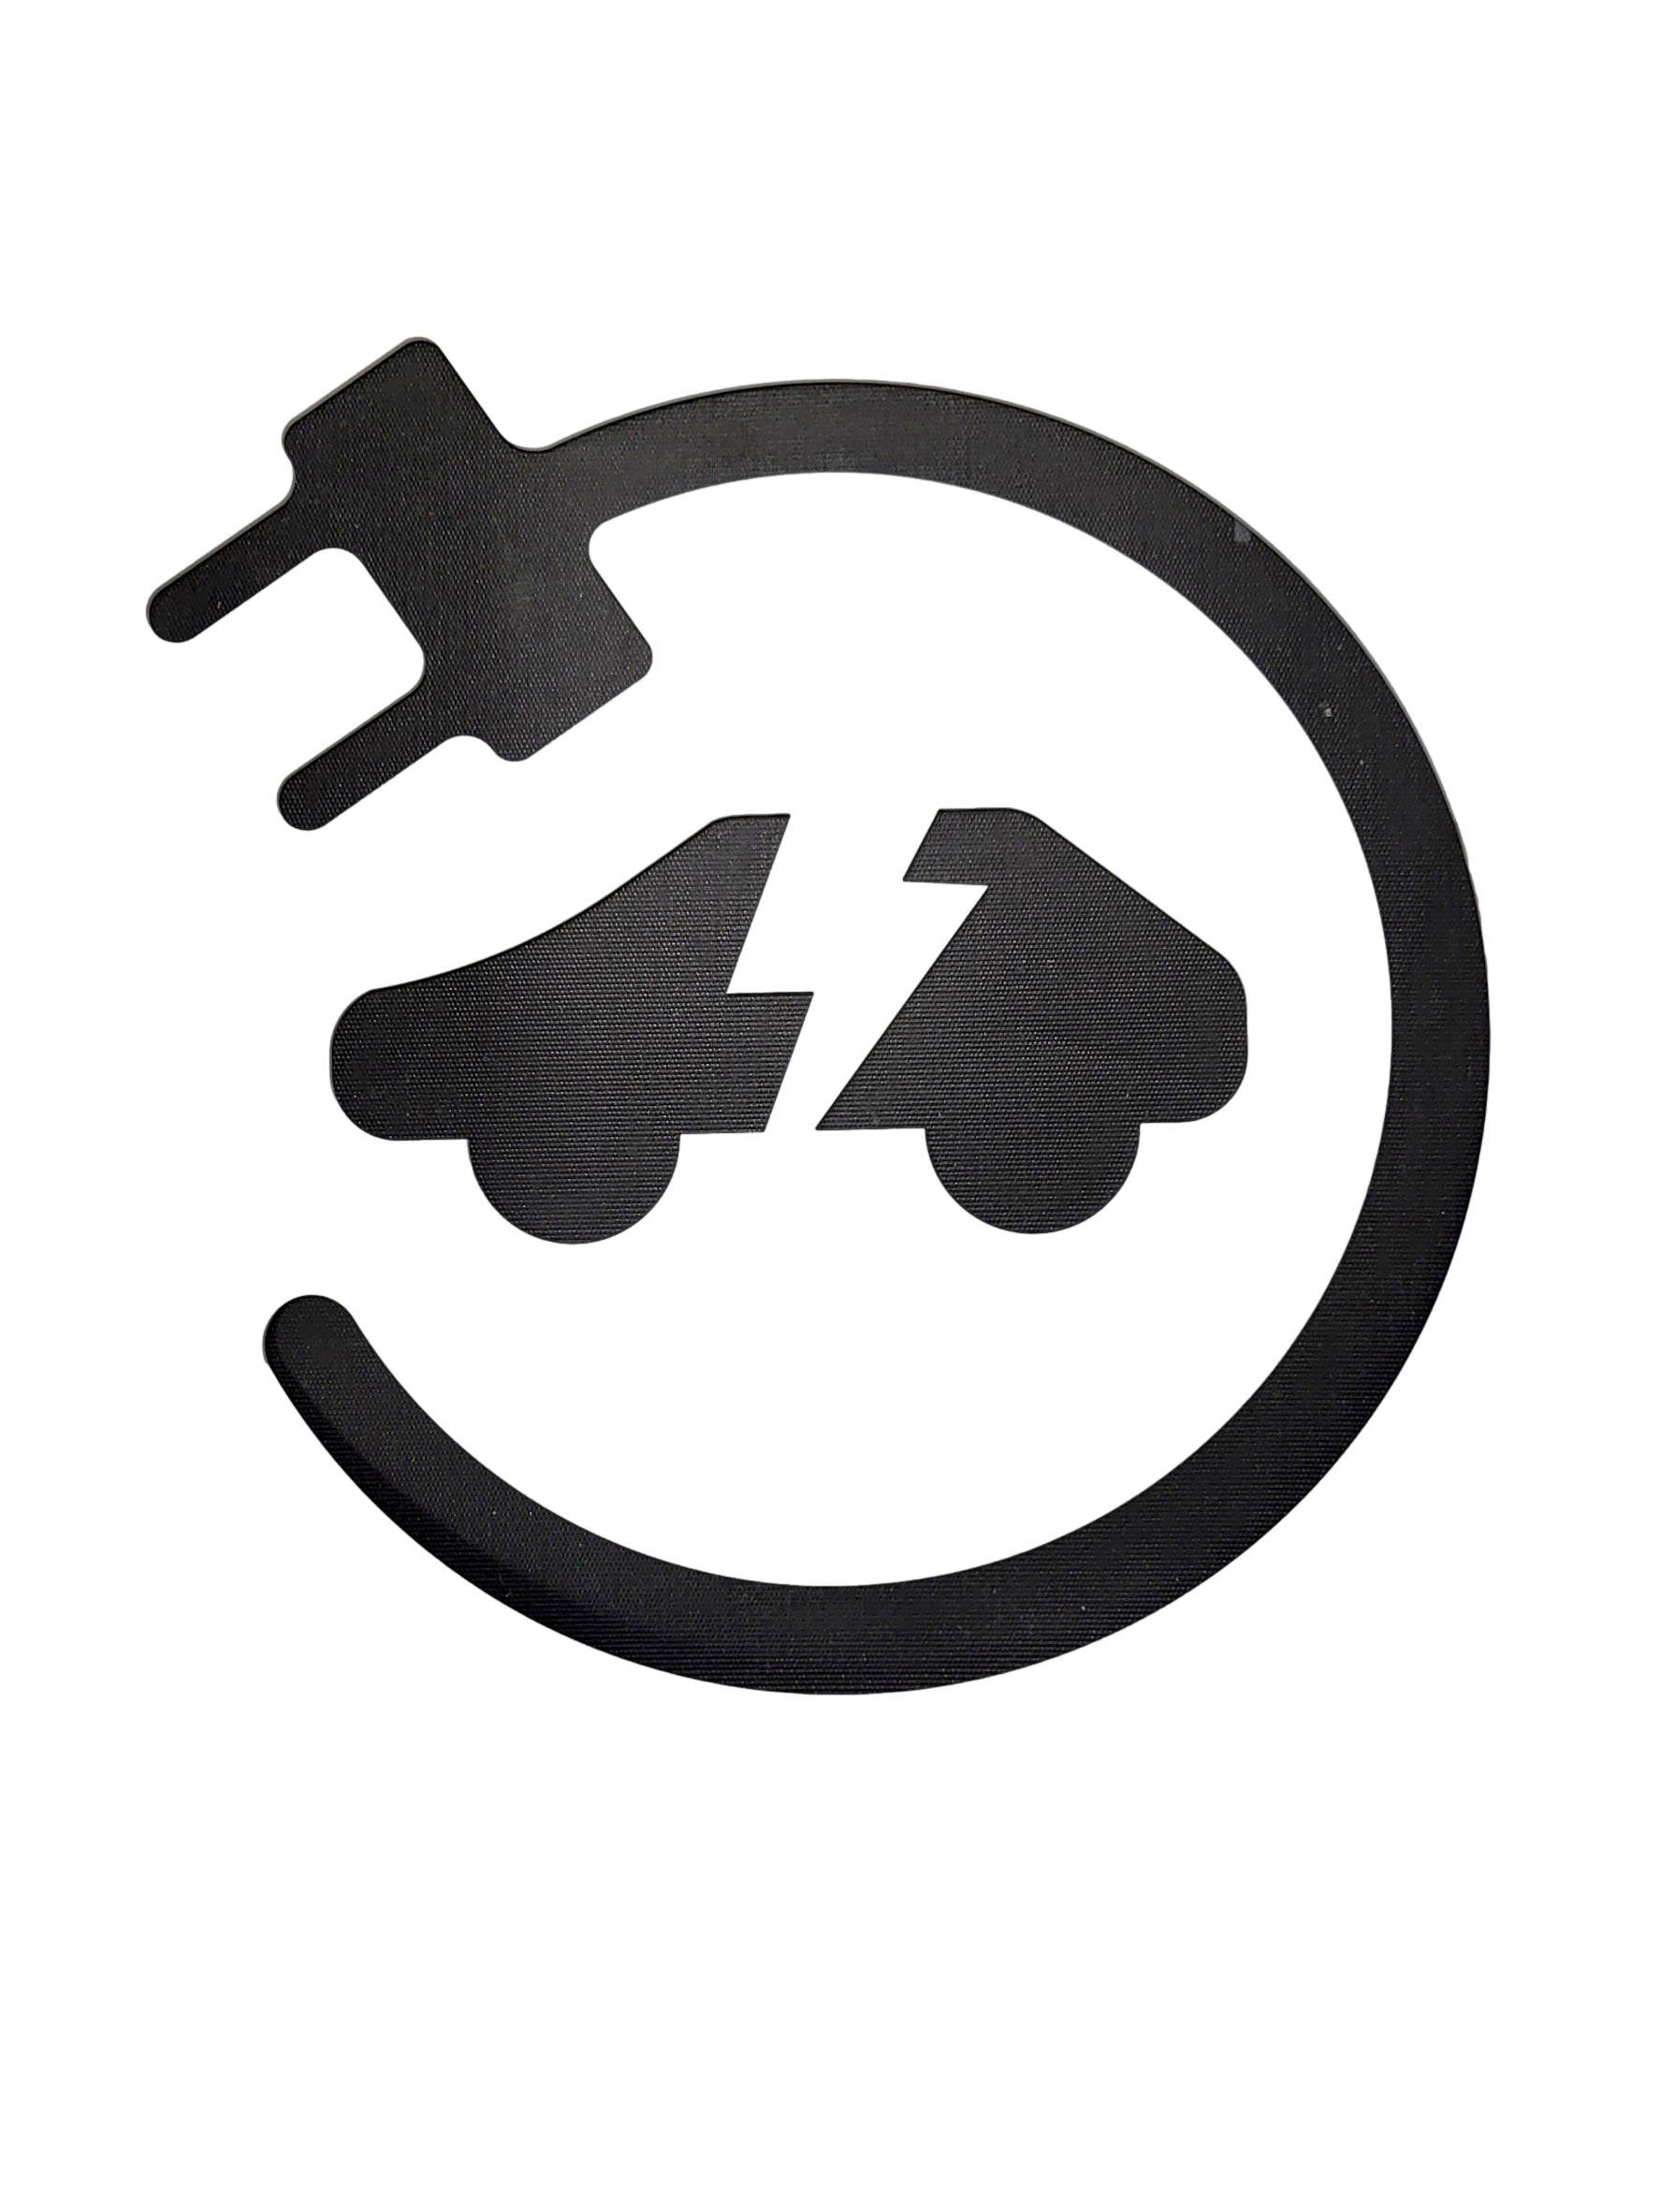 Electric Vehicle Charging Stencil